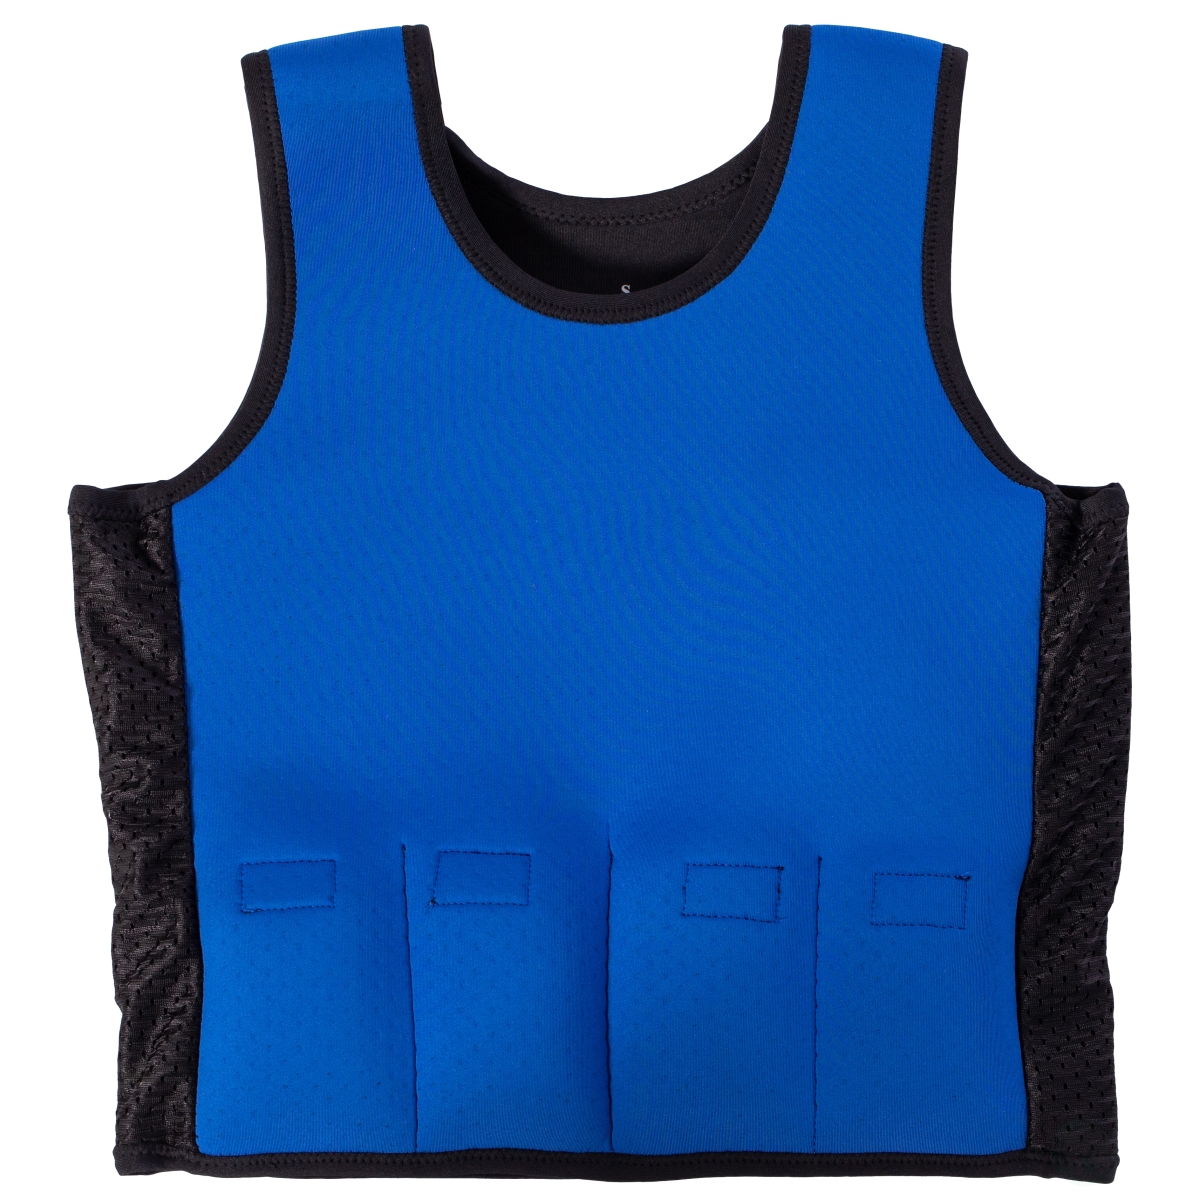 Picture of ShpilMaster QI004618.M Weighted Sensory Compression Vest for Calming Deep Pressure Therapy and Sensory Integration in Autism, ADHD, and Special Needs Individuals - Medium